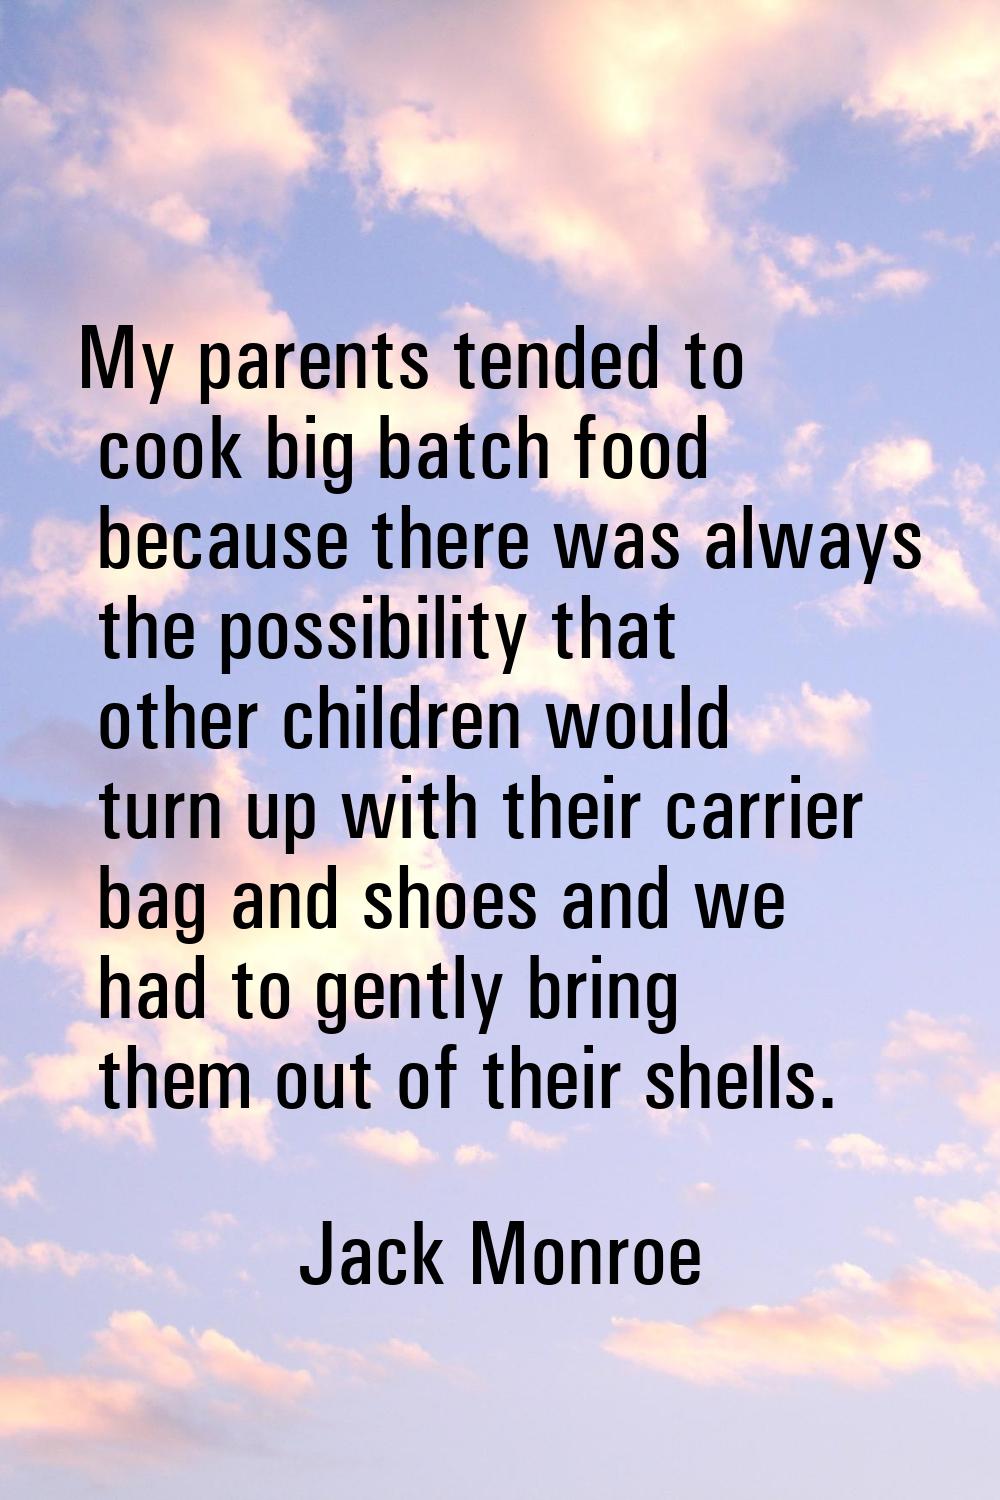 My parents tended to cook big batch food because there was always the possibility that other childr